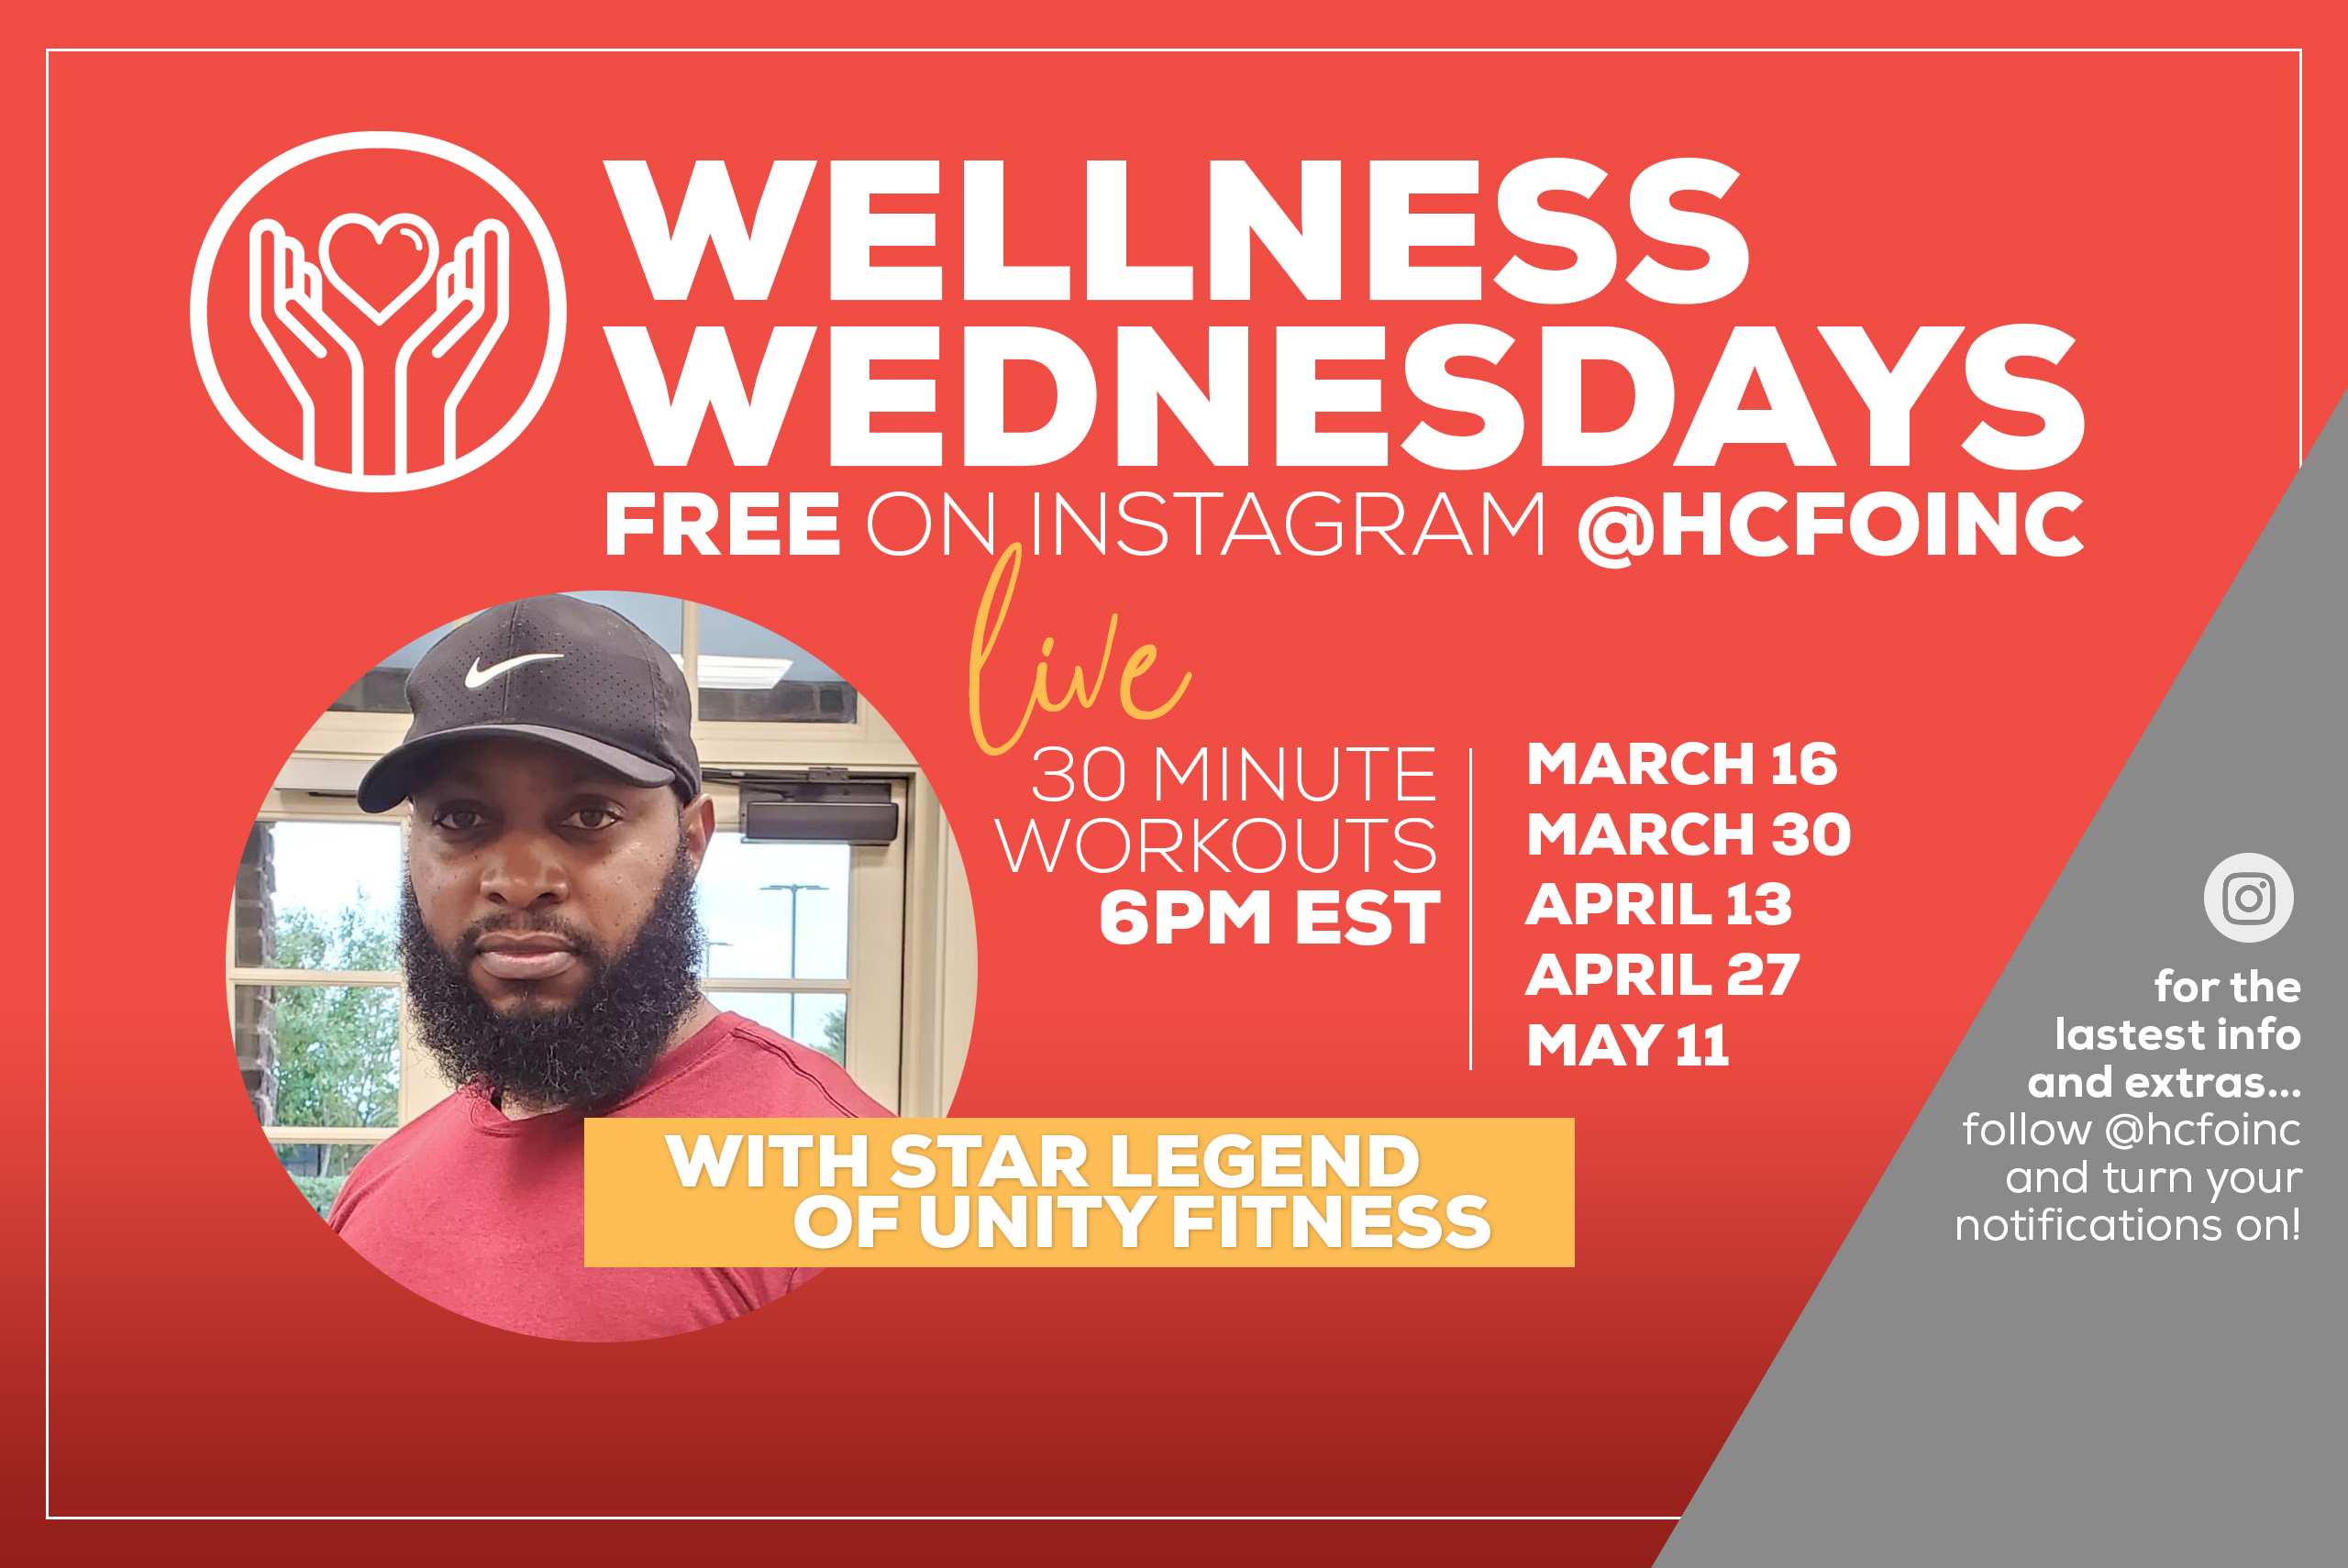 Wellness Wednesday Virtual Workouts with Star Legend of Unity Fitness. Join Us Live on Instagram @hcfoinc